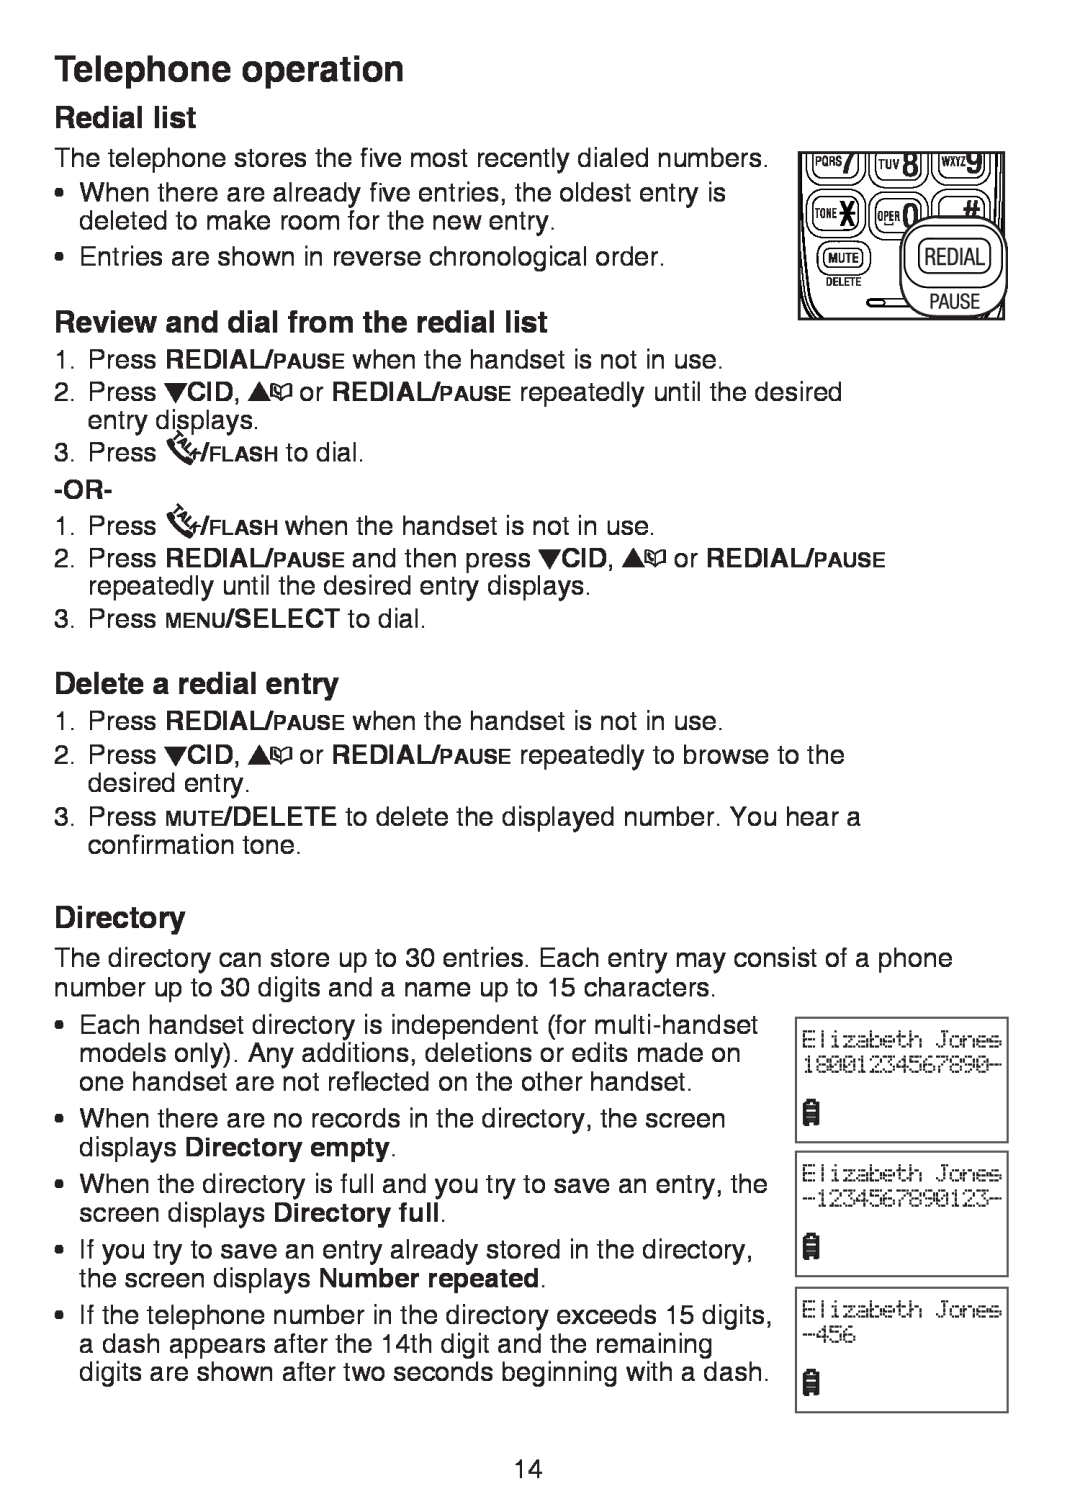 VTech CS6124-11 Redial list, Review and dial from the redial list, Delete a redial entry, Directory, Telephone operation 